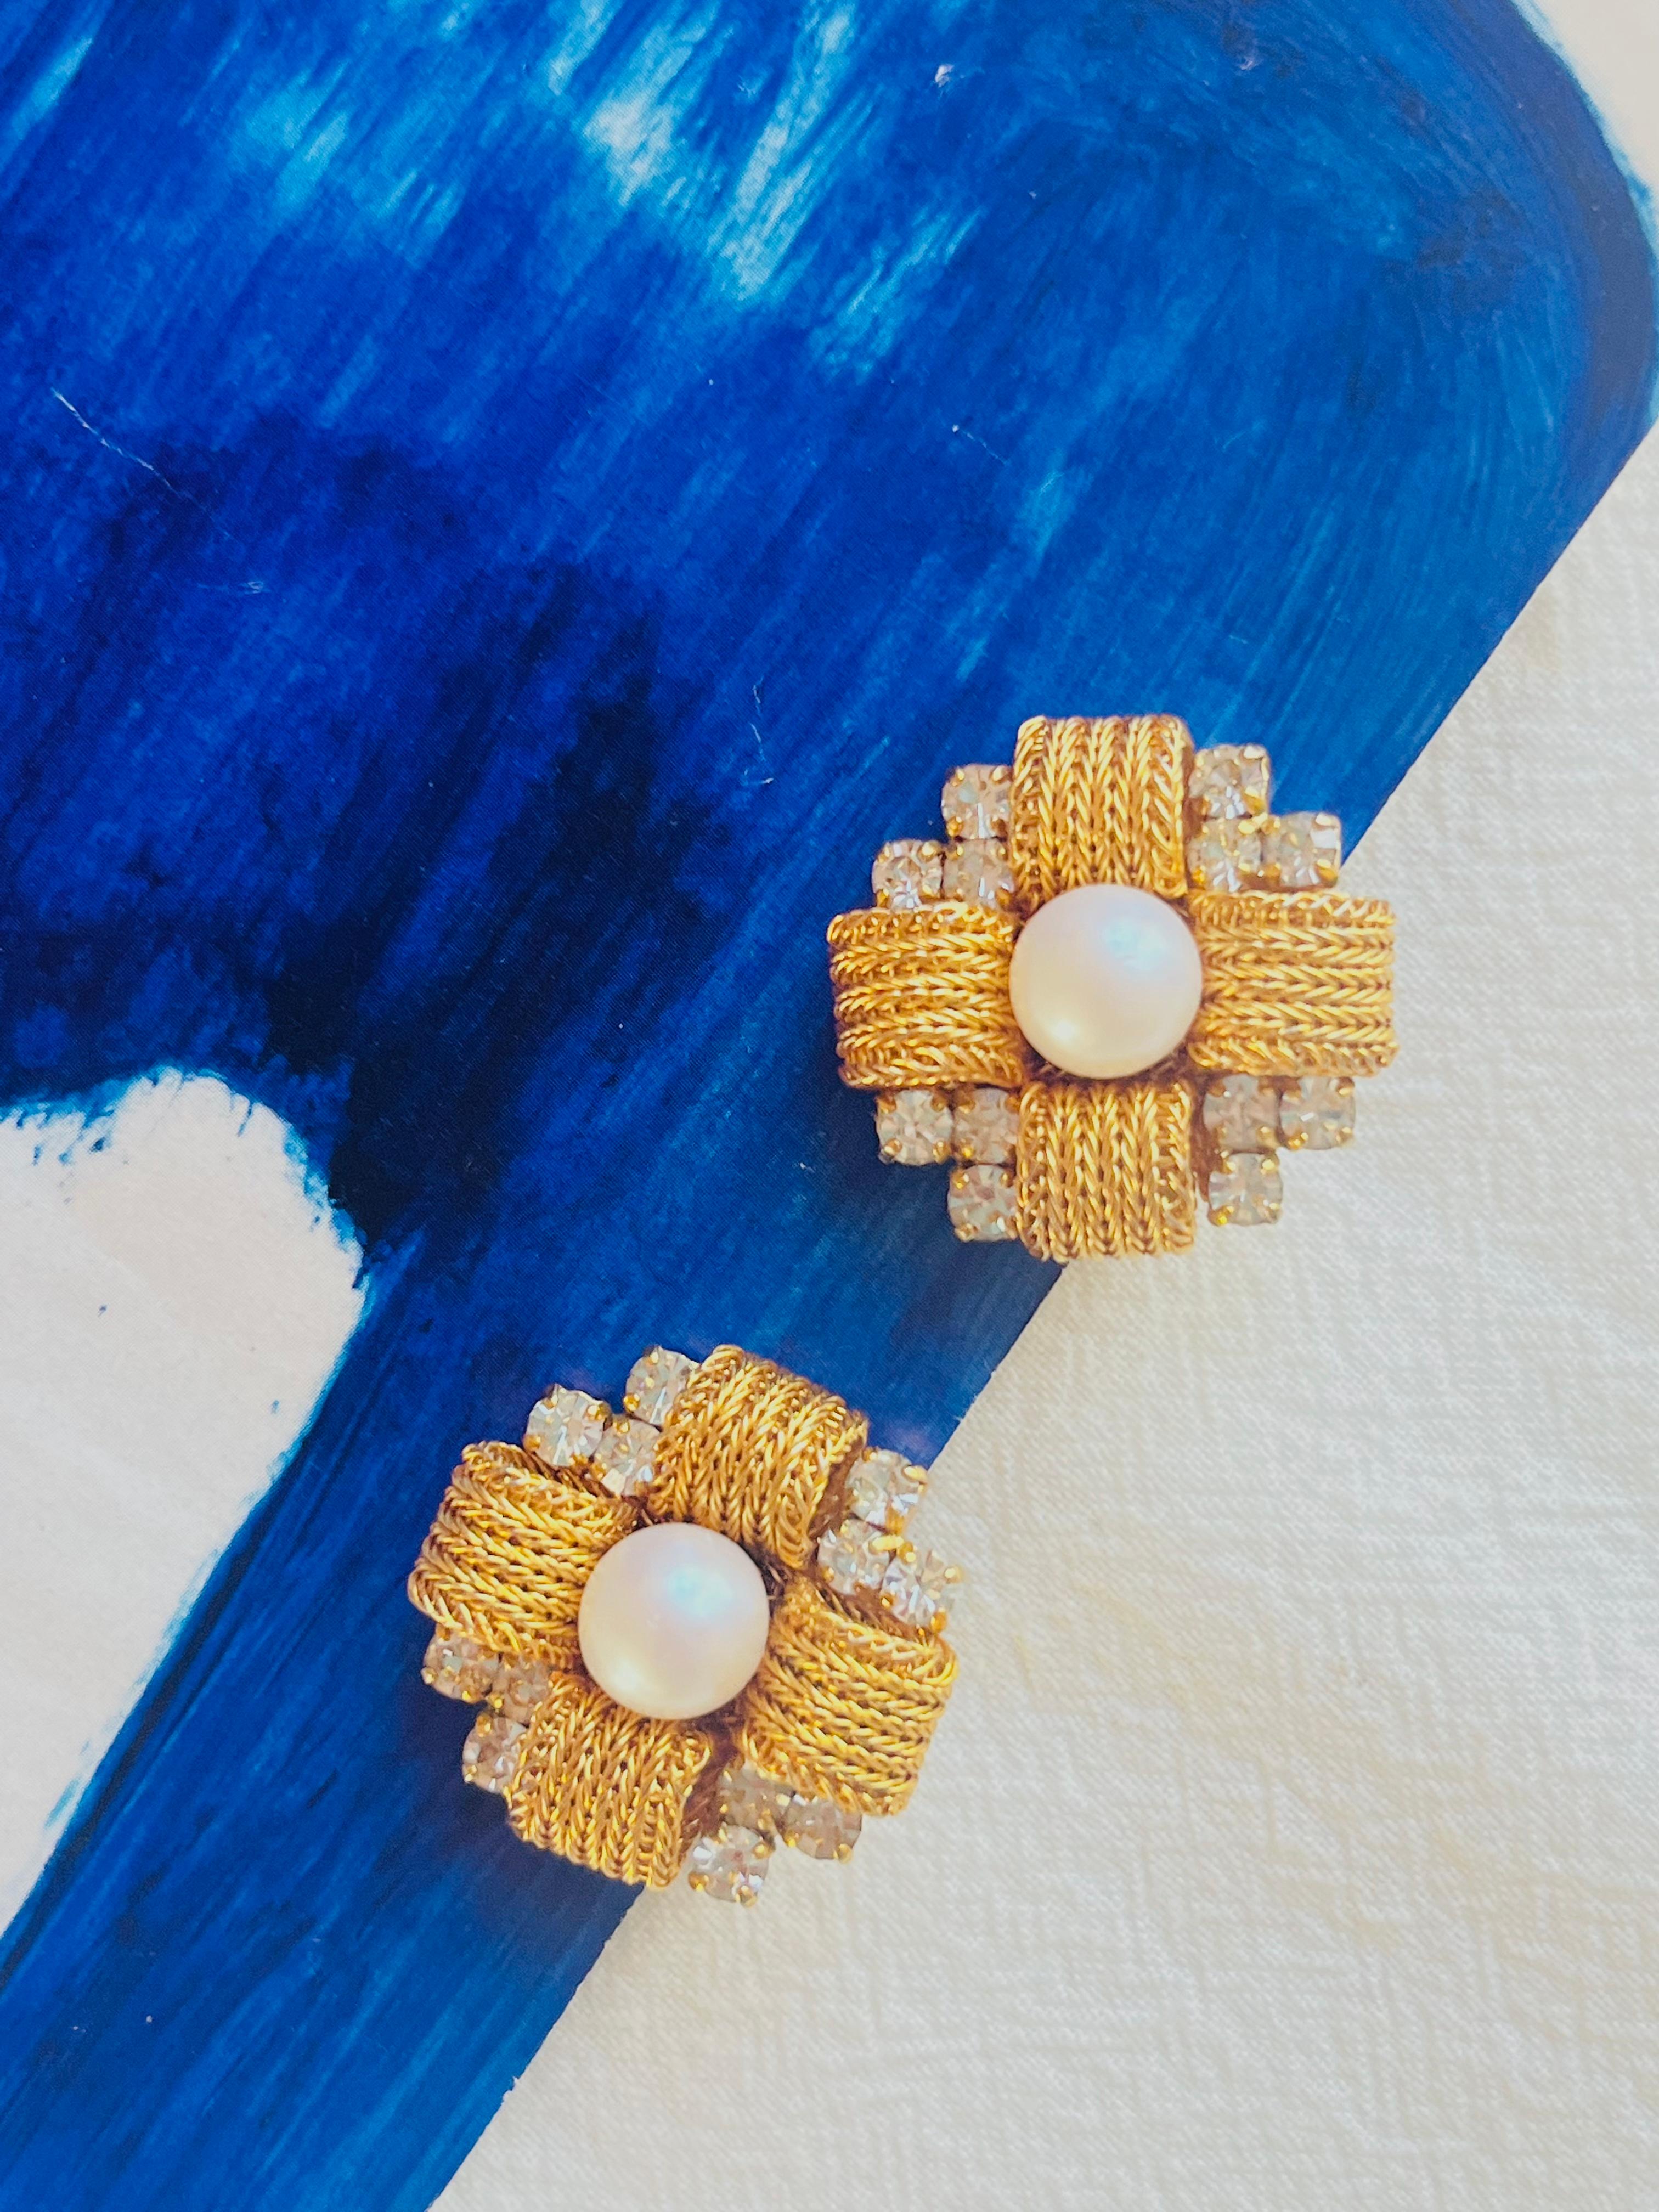 Christian Dior 1969 Vintage Woven Cross Pearl Crystal Flower Clip Gold Earrings In Good Condition For Sale In Wokingham, England